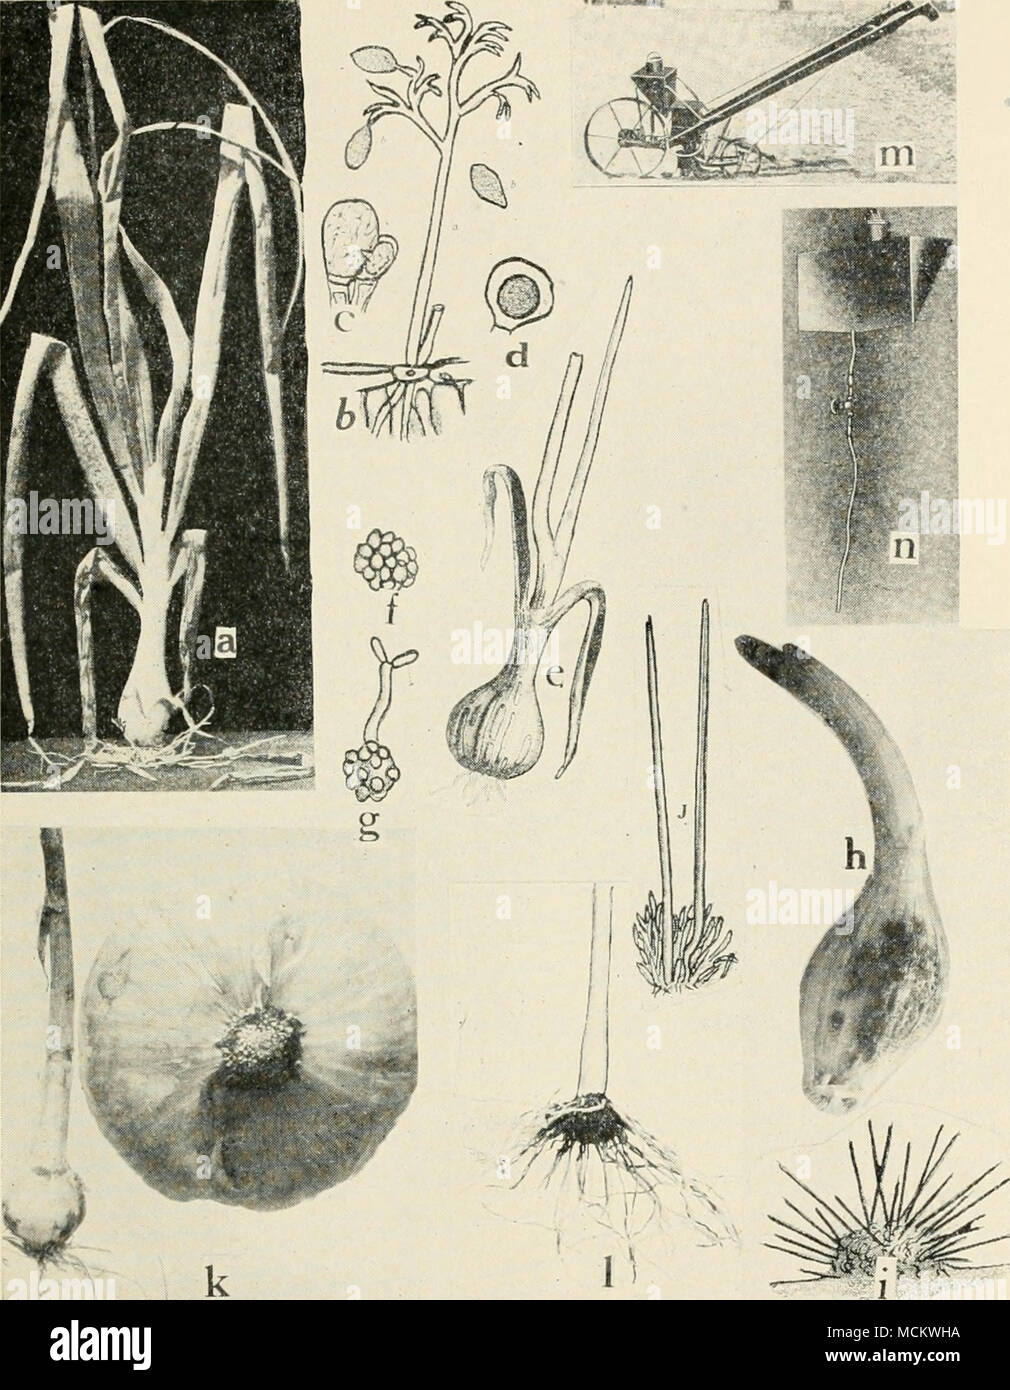 . Fig. 54. Onion Diseases. a. Downy mildew, 6. mature conidiophore and conidia of Peronospora schleideni, c. fertilization of the female oogonium by the male antheridium, d. oospore (a. to d. after Wh2tzel), e. onion smut, /. spore ball of the smut fungus, g. spore germina- tion, formation of sporidia at x, h. Vermicularia anthracnose, i. section through acervulis of Vermicularia circinans, j. setas and spore formation in 1-'. circinans {e. to g., i. and i. after Thaxter), k. pink root of onion, healthy and diseased bulbs, /. pink root of onion showing nipple formation, m. a formaldehyde drip  Stock Photo